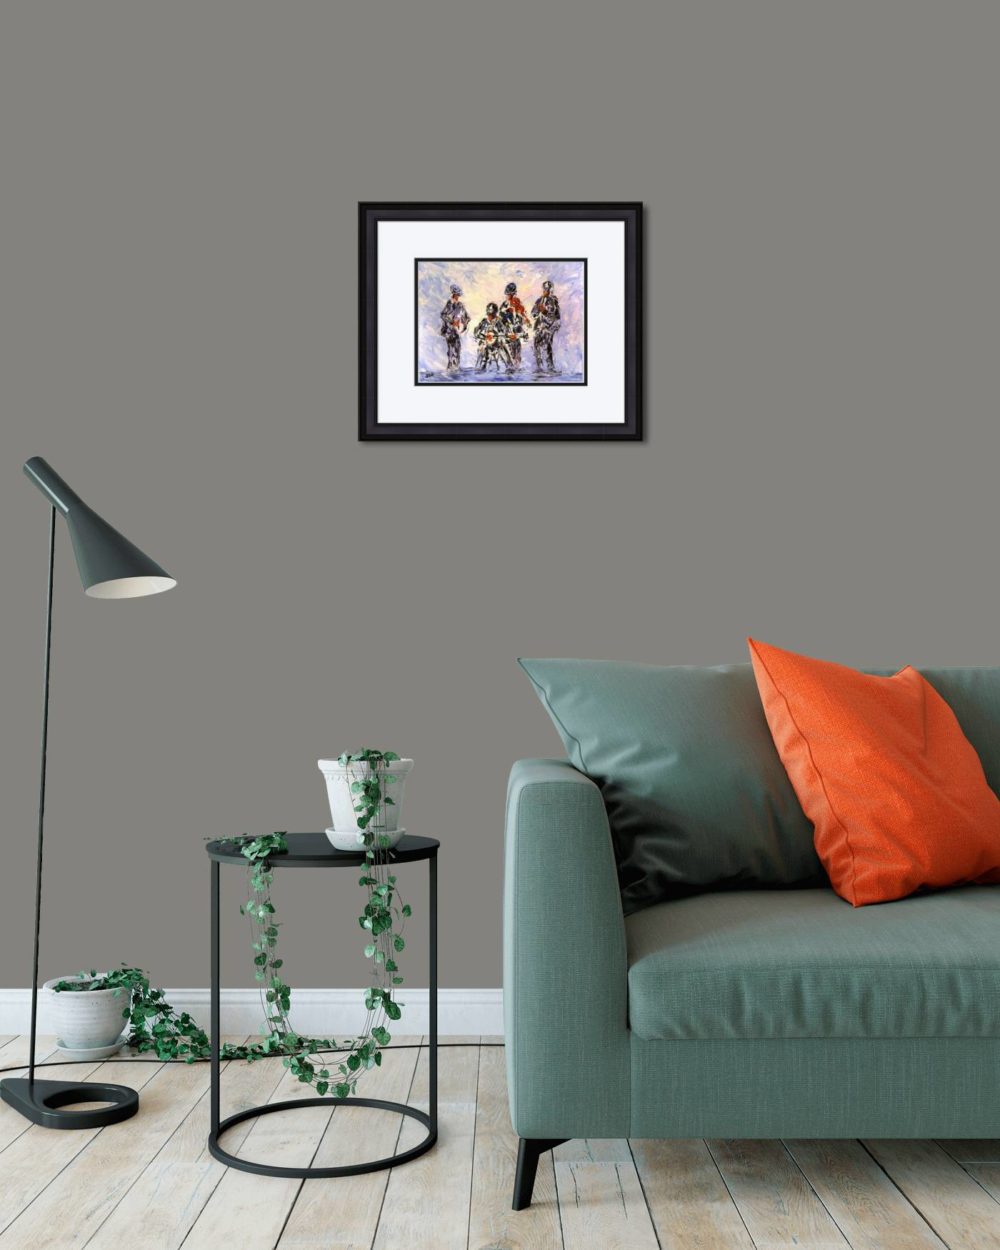 Music Session Print (Small) in Black Frame in Room